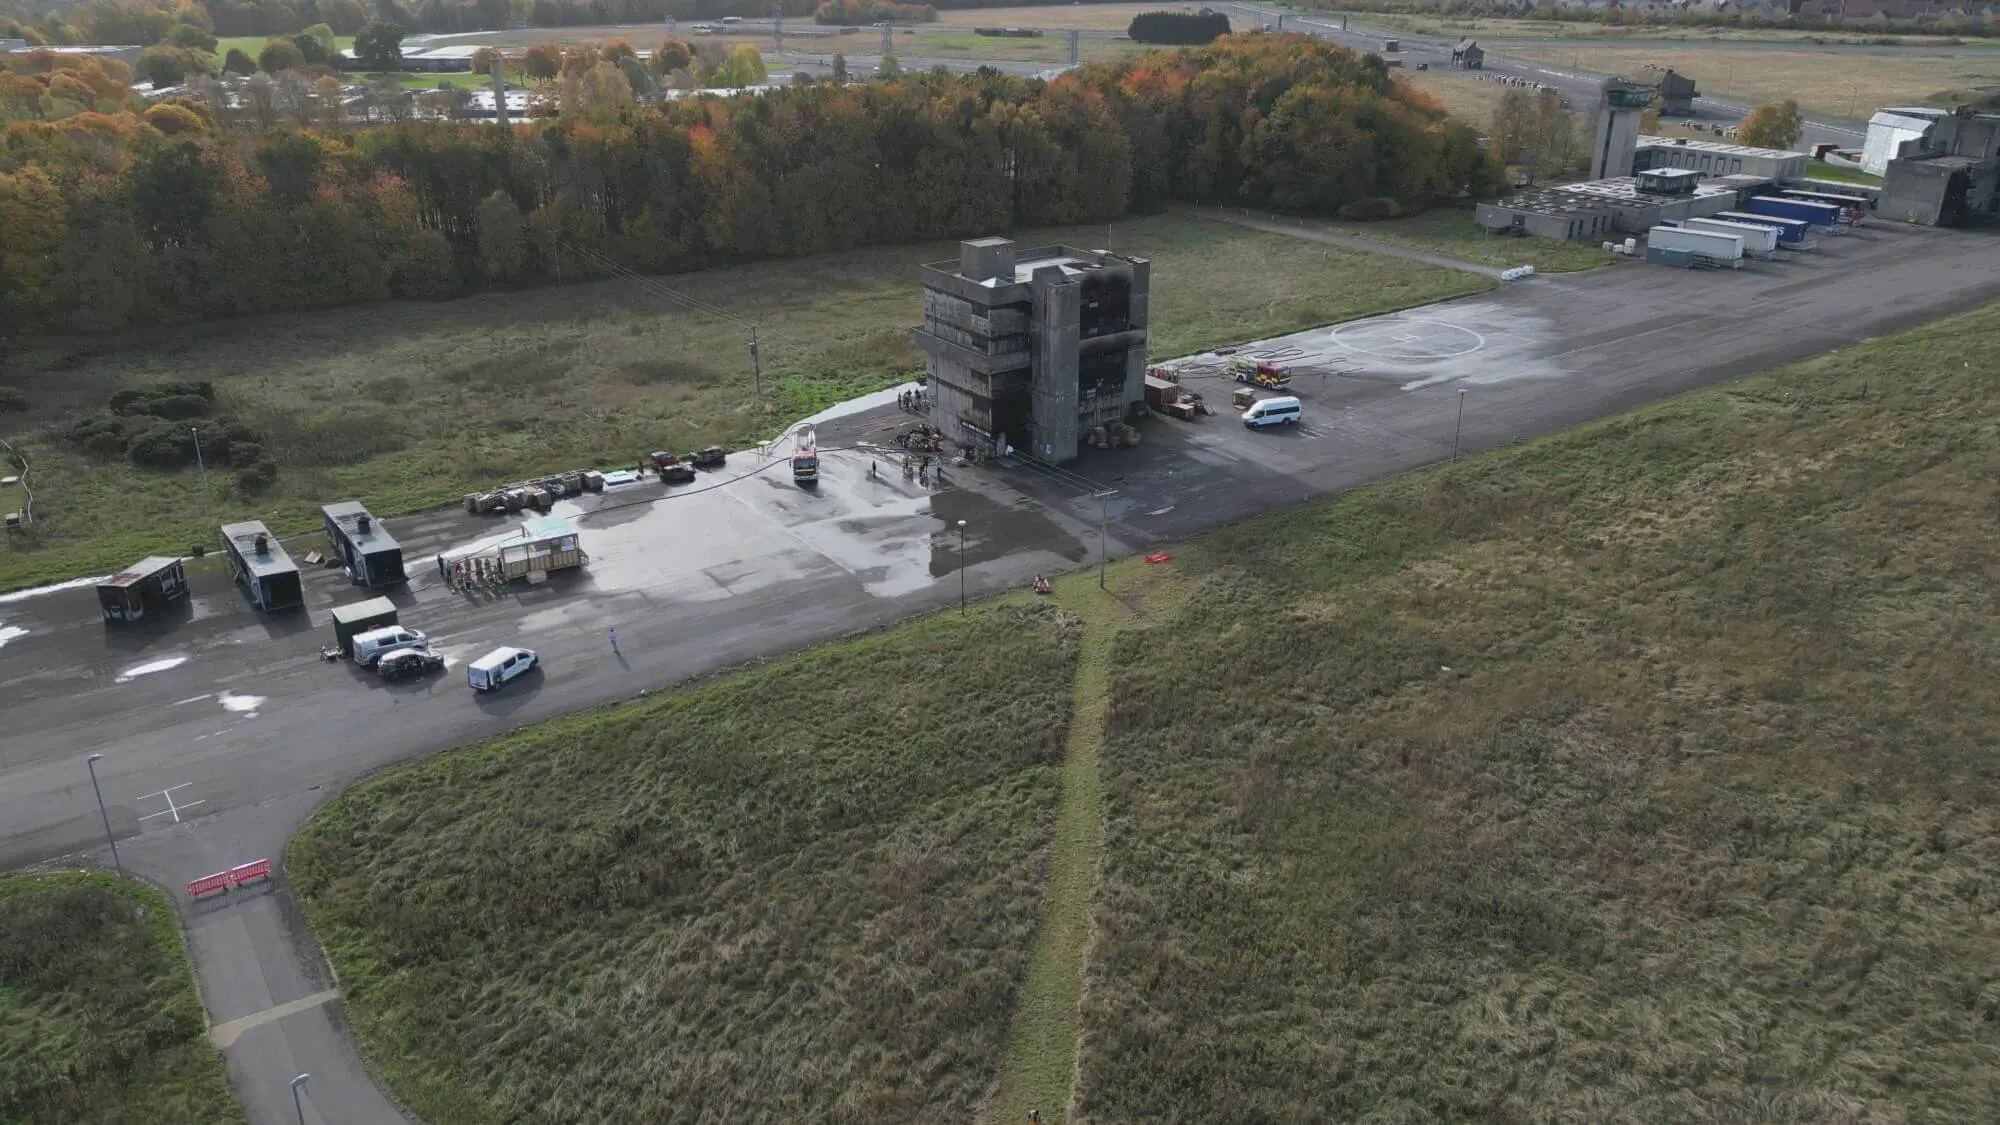 Firefighter training area aerial view